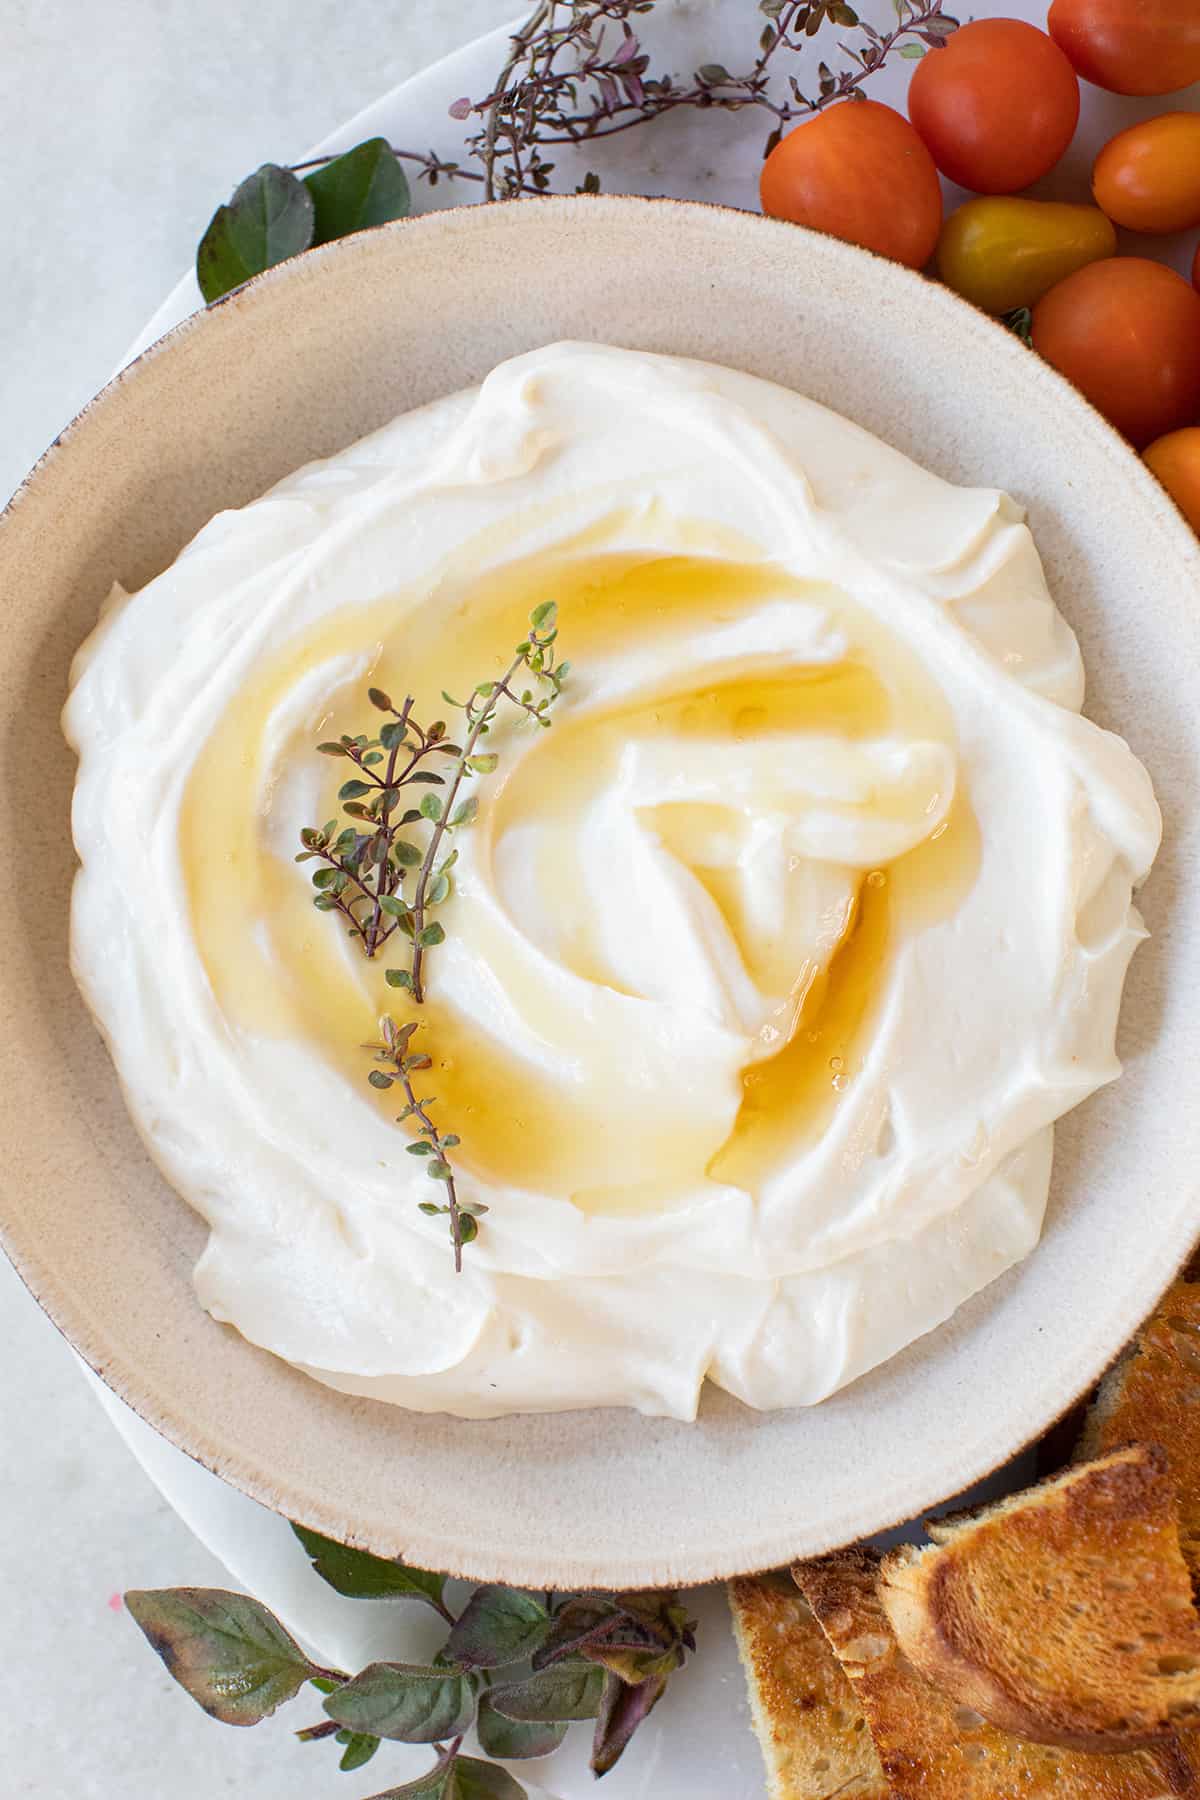 Creamy whipped ricotta with honey drizzled over the top,